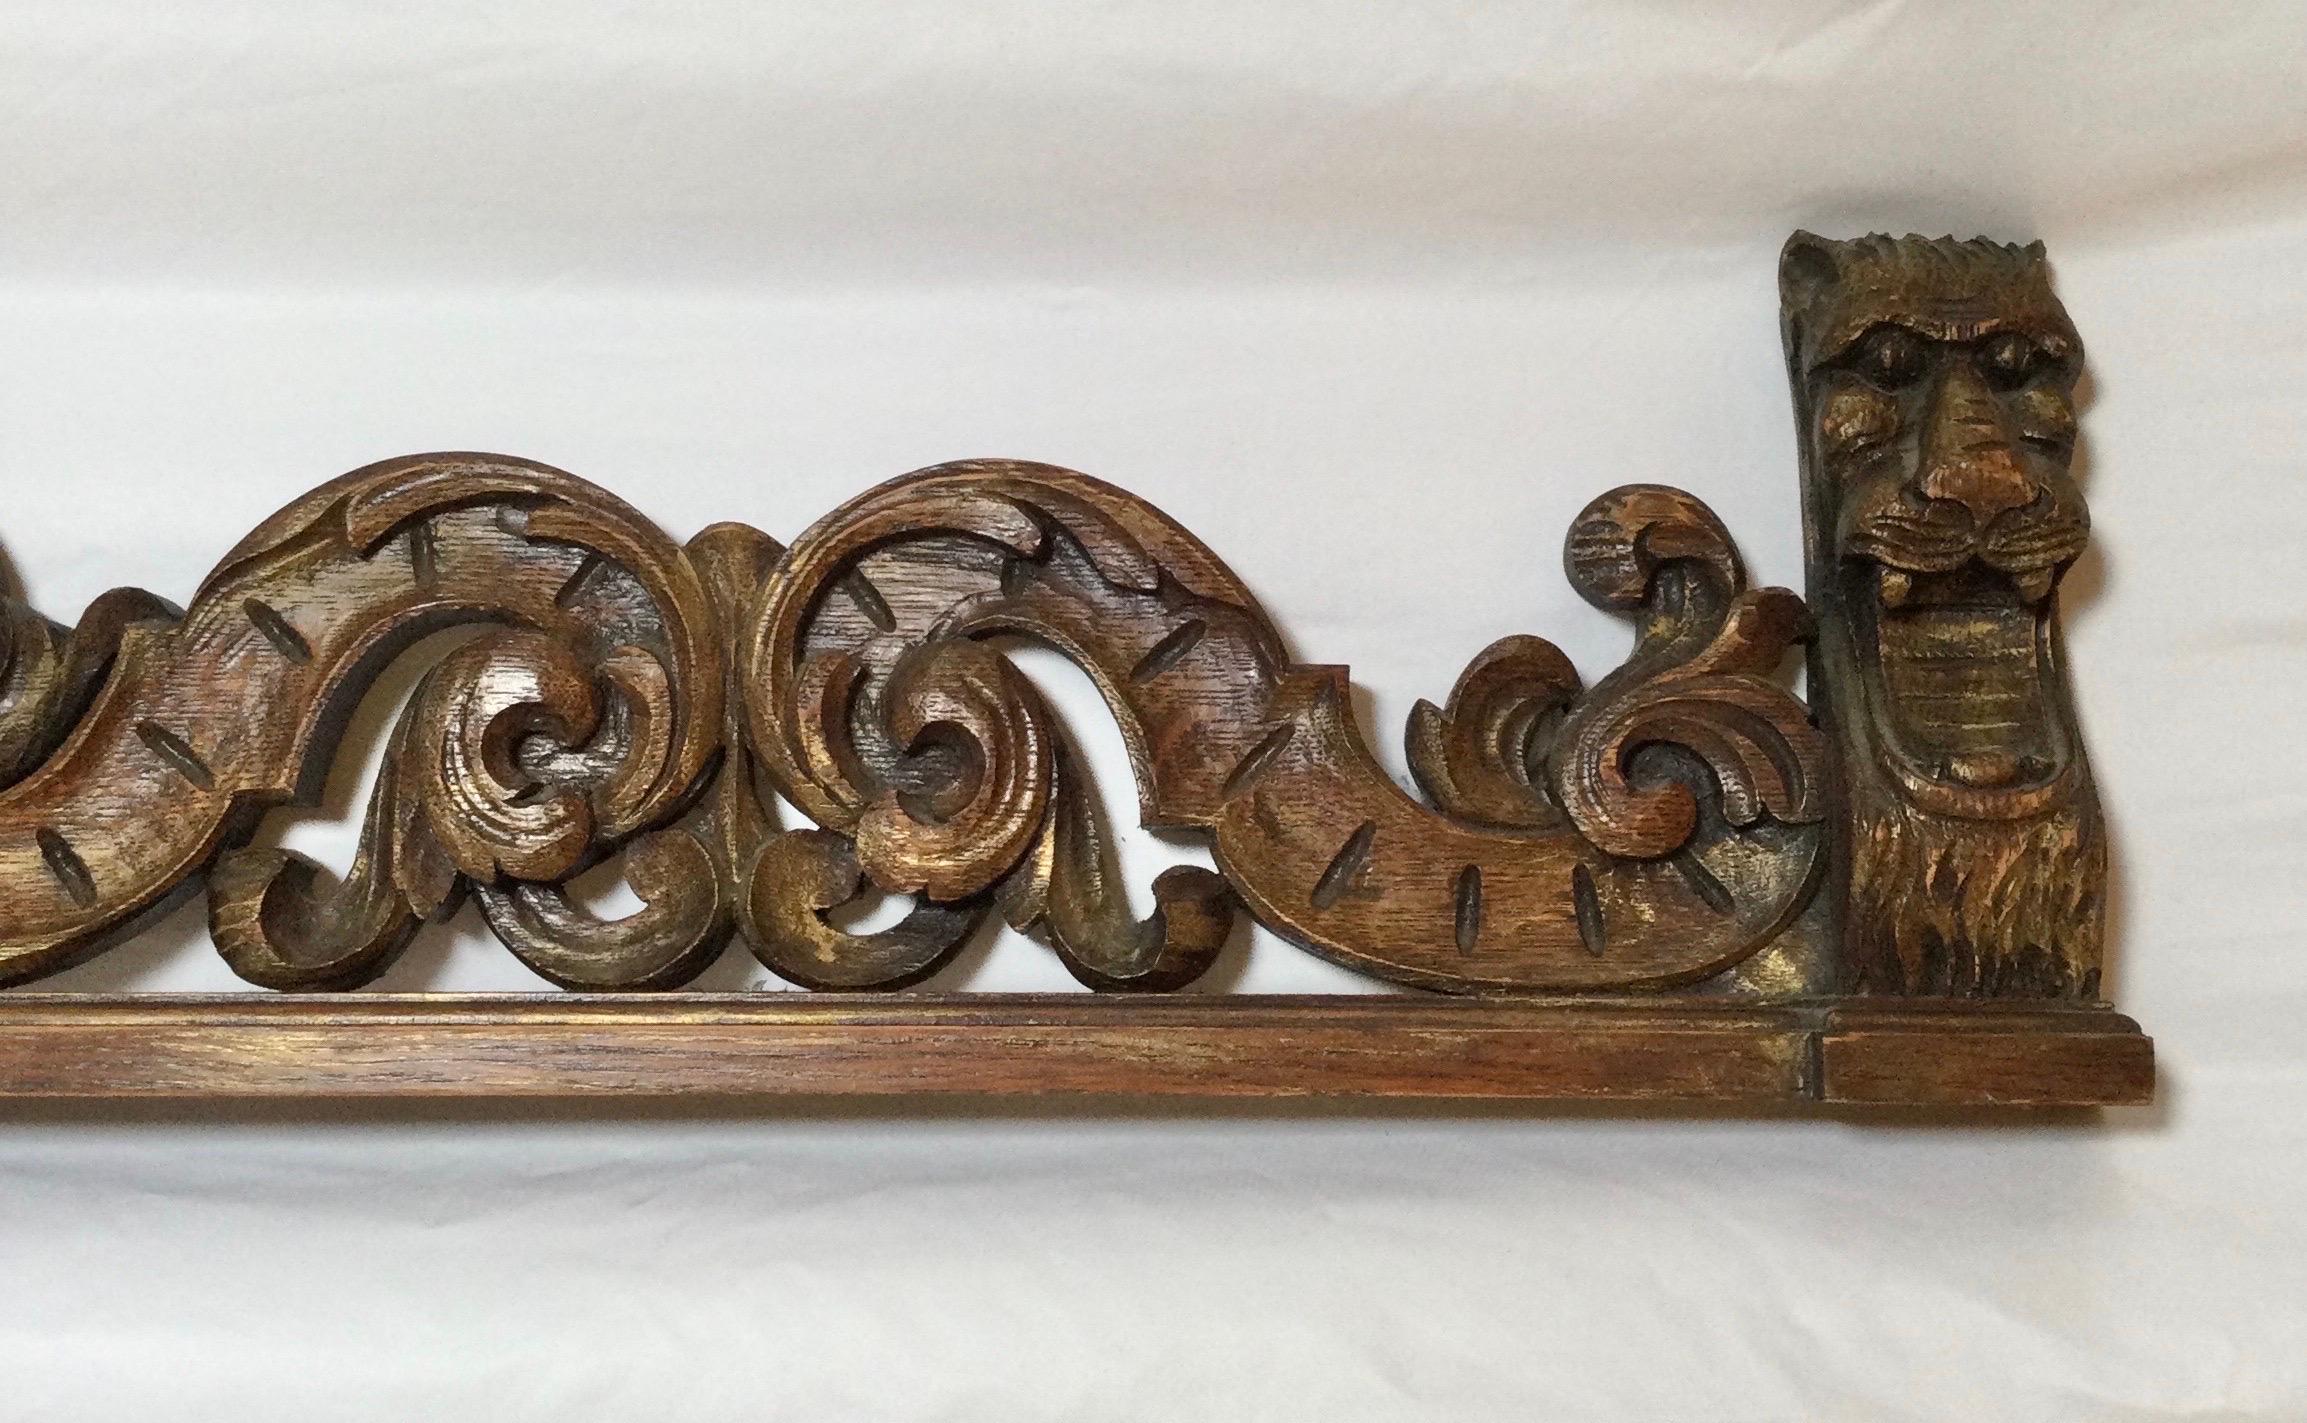 An ornately hand carved dark oak valance with lion head decoration on each end. The center with a mask of the lord of the winds carving flanked by beautifully caved scrolling. 71 inches wide, can be used over a door or archway or a window.